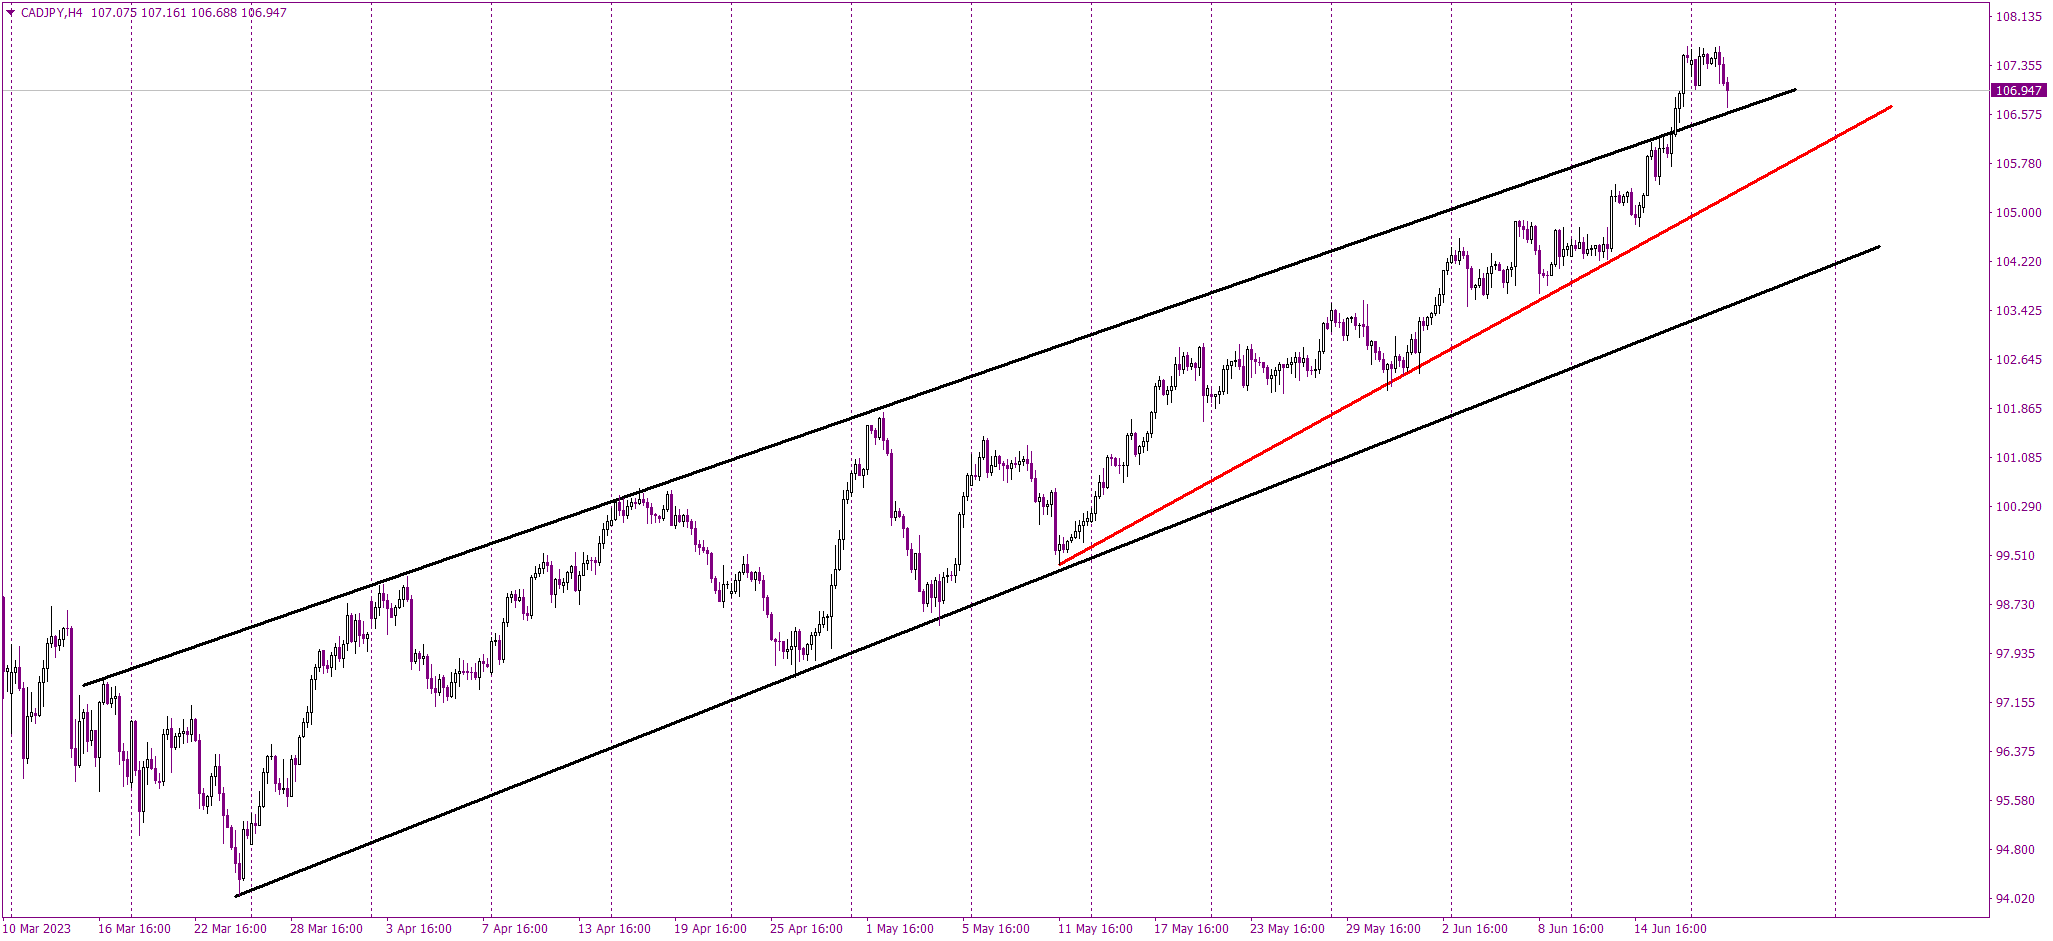 CADJPY: Breakout from Channel Up Formation Highlights Strength